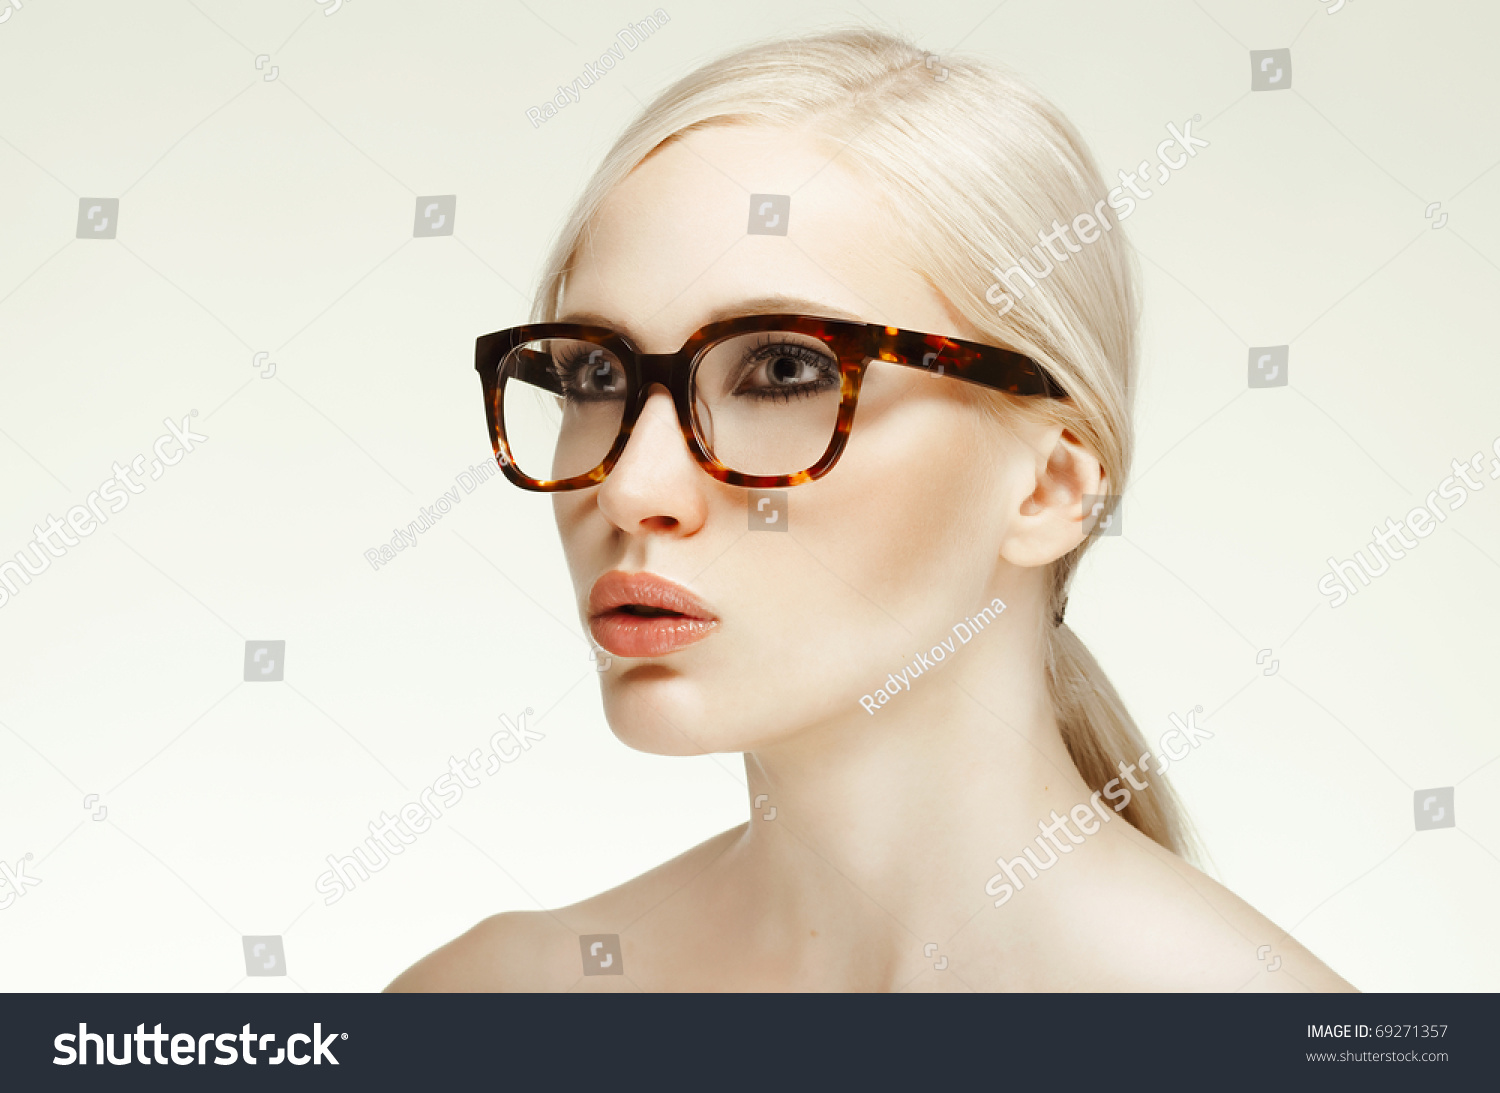 Portrait Of Beautiful Blond Woman In Glasses Posing On